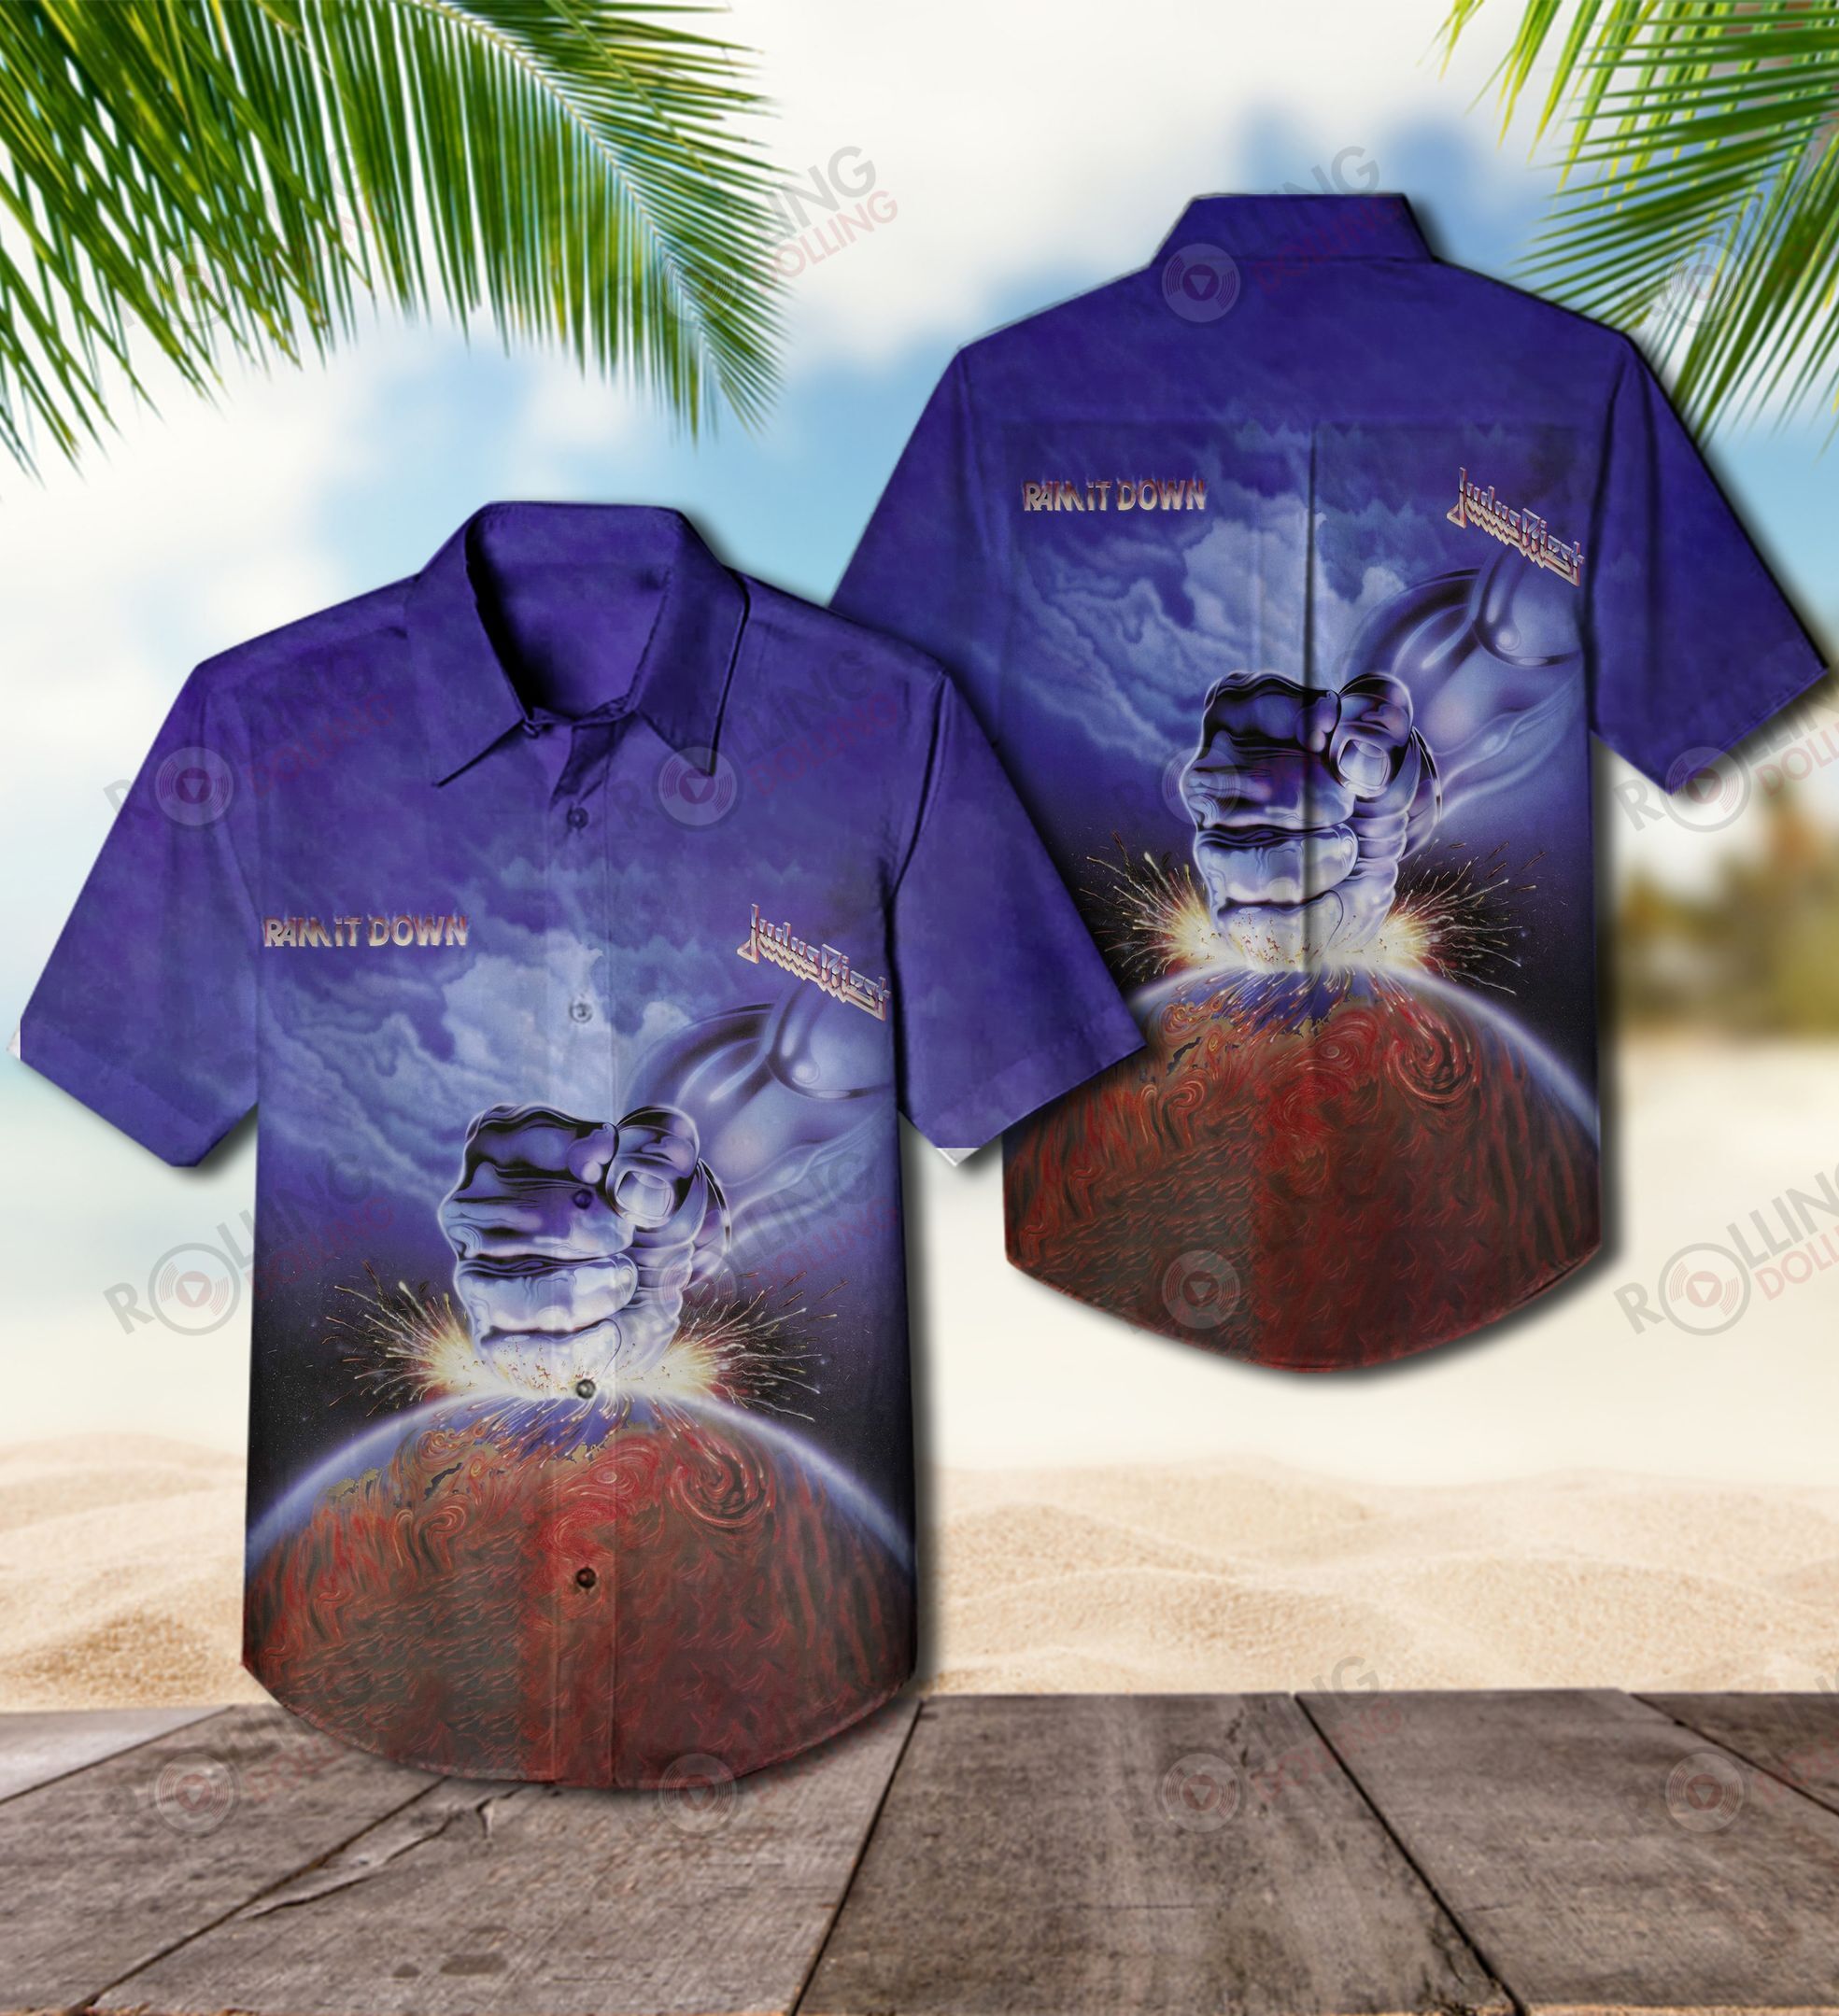 For summer, consider wearing This Amazing Hawaiian Shirt shirt in our store 80